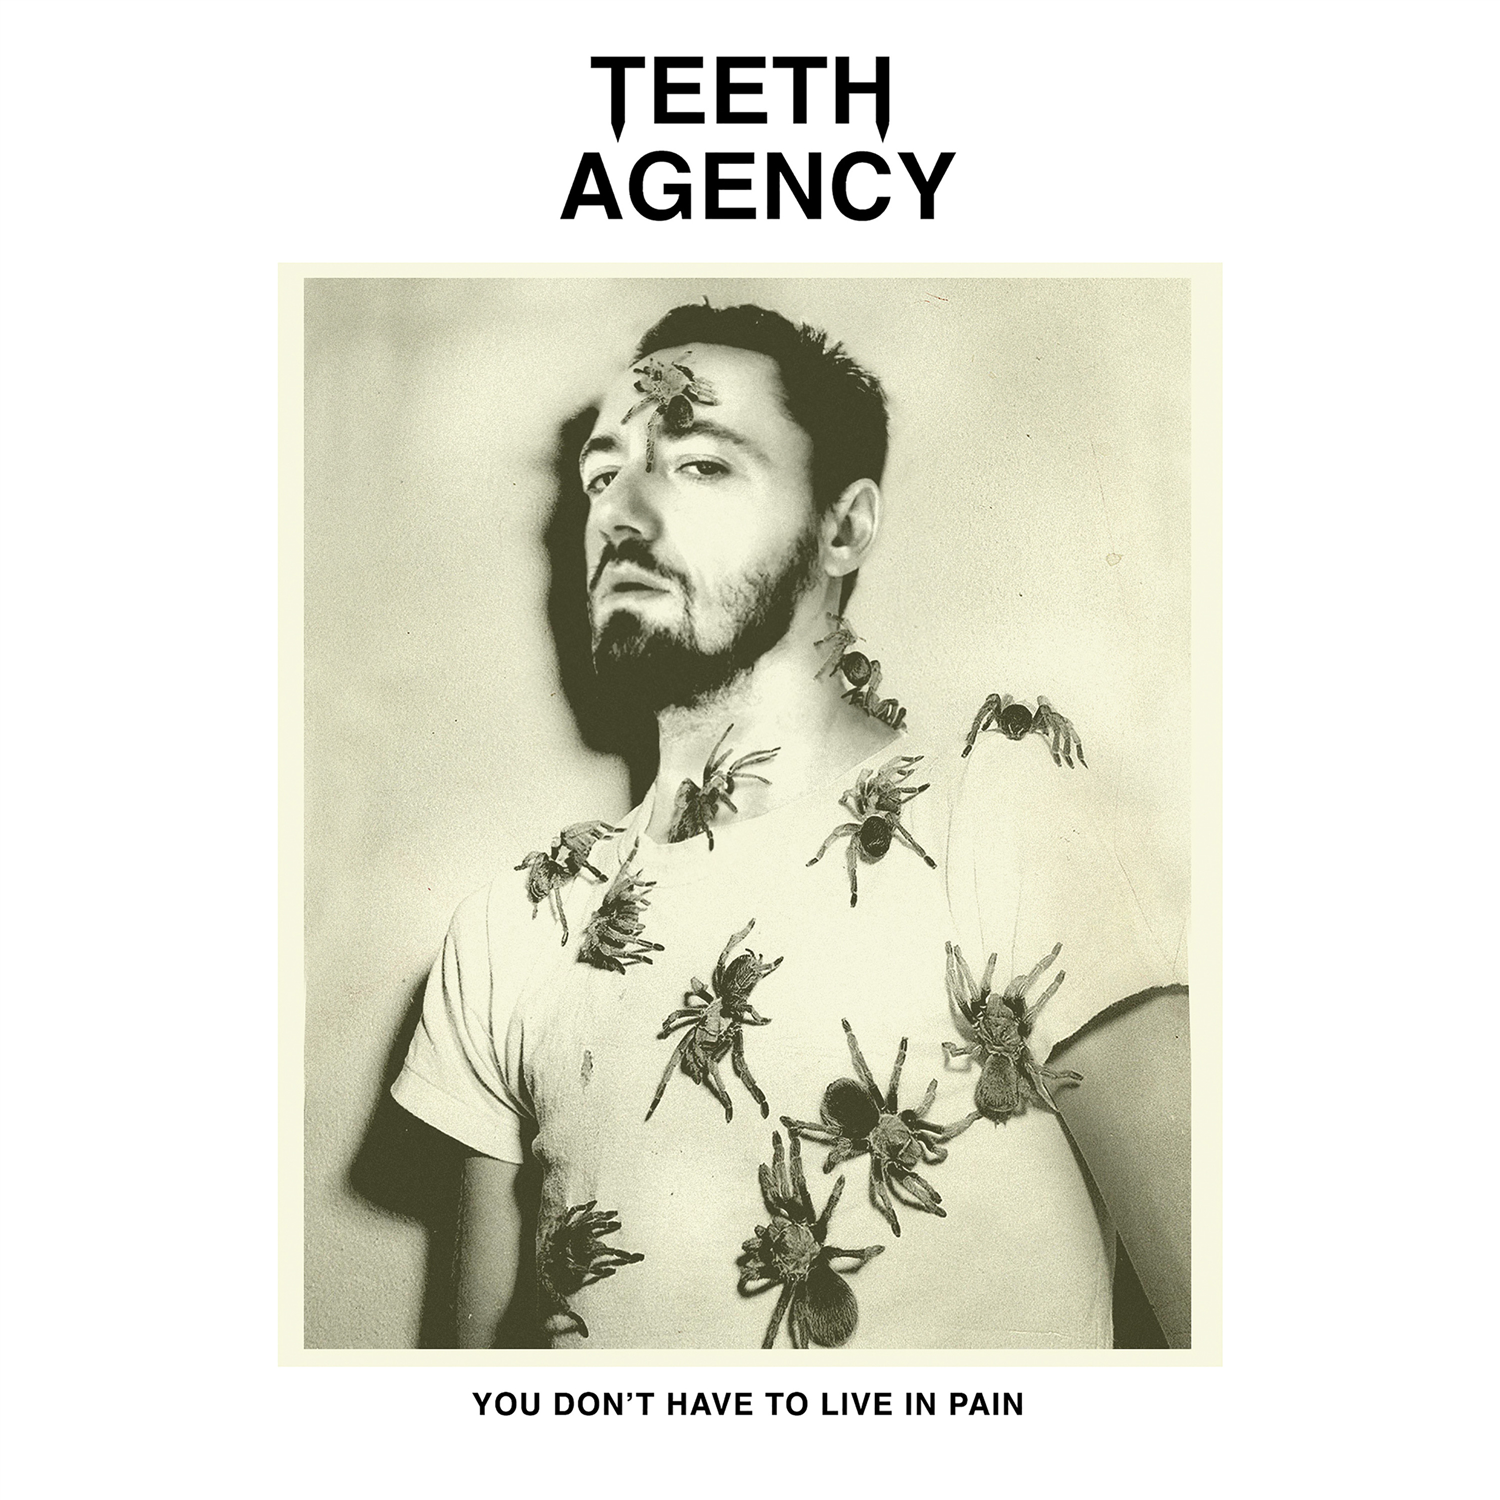 TEETH AGENCY - You Don't Have To Live In Pain - 2LP - Vinyl